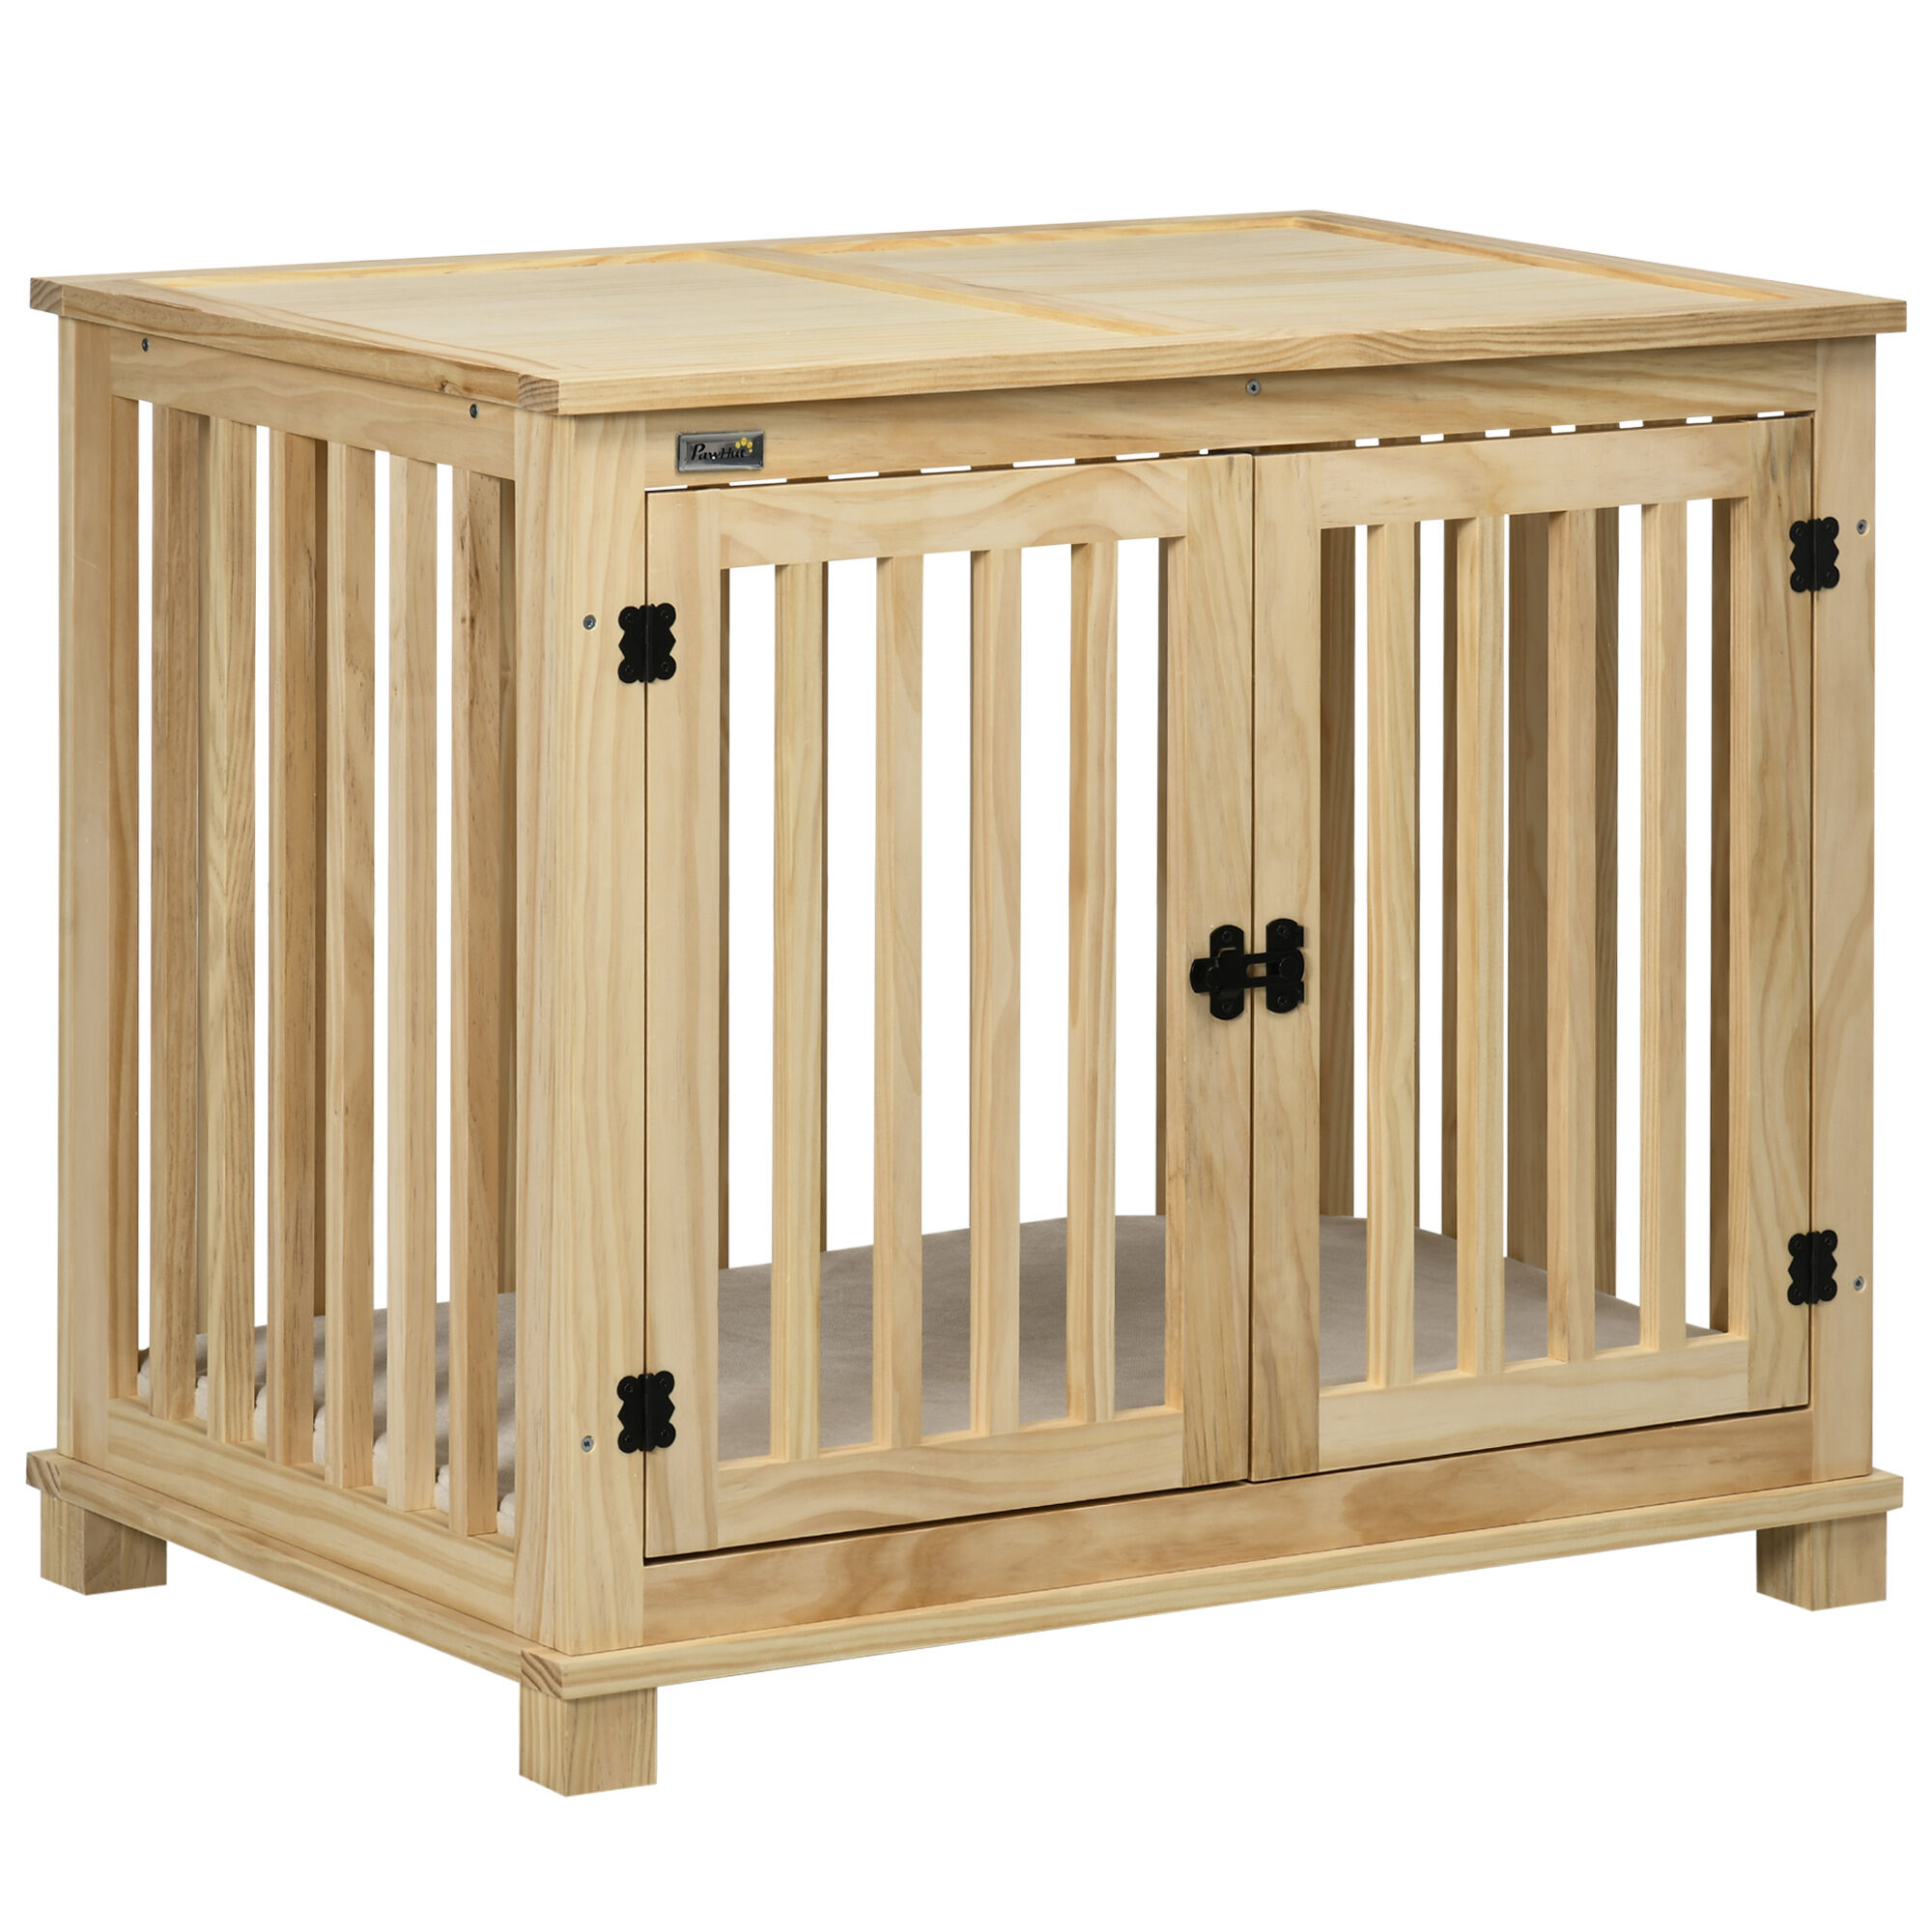 PawHut Chic Wooden Dog Crate Furniture w/ Cushion Double Doors Natural for Small Medium Dogs Indoor Pet Crate   Aosom.com